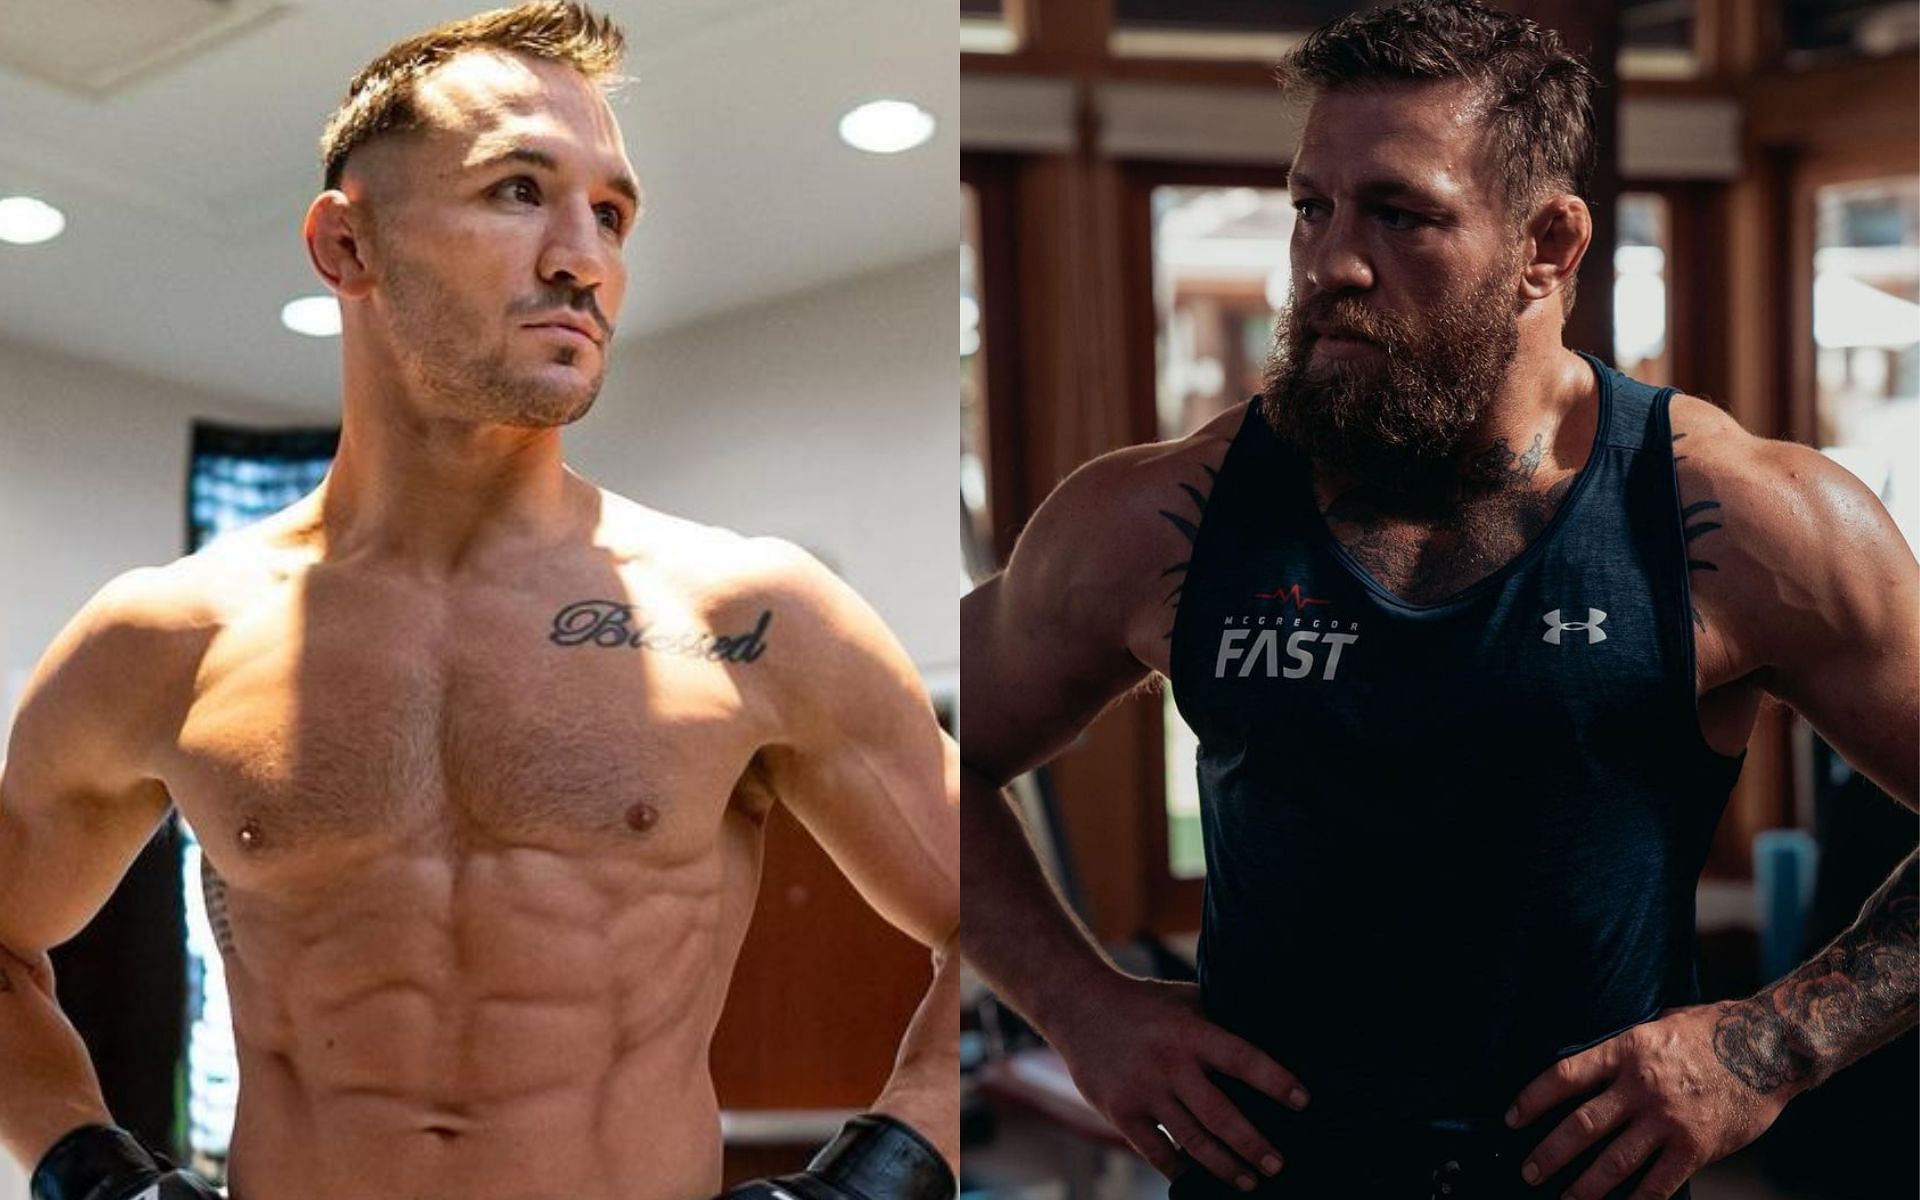 Michael Chandler (Left), Conor McGregor (Right) [Image courtesy: @mikechandlermma and @thenotoriousmma on Instagram]